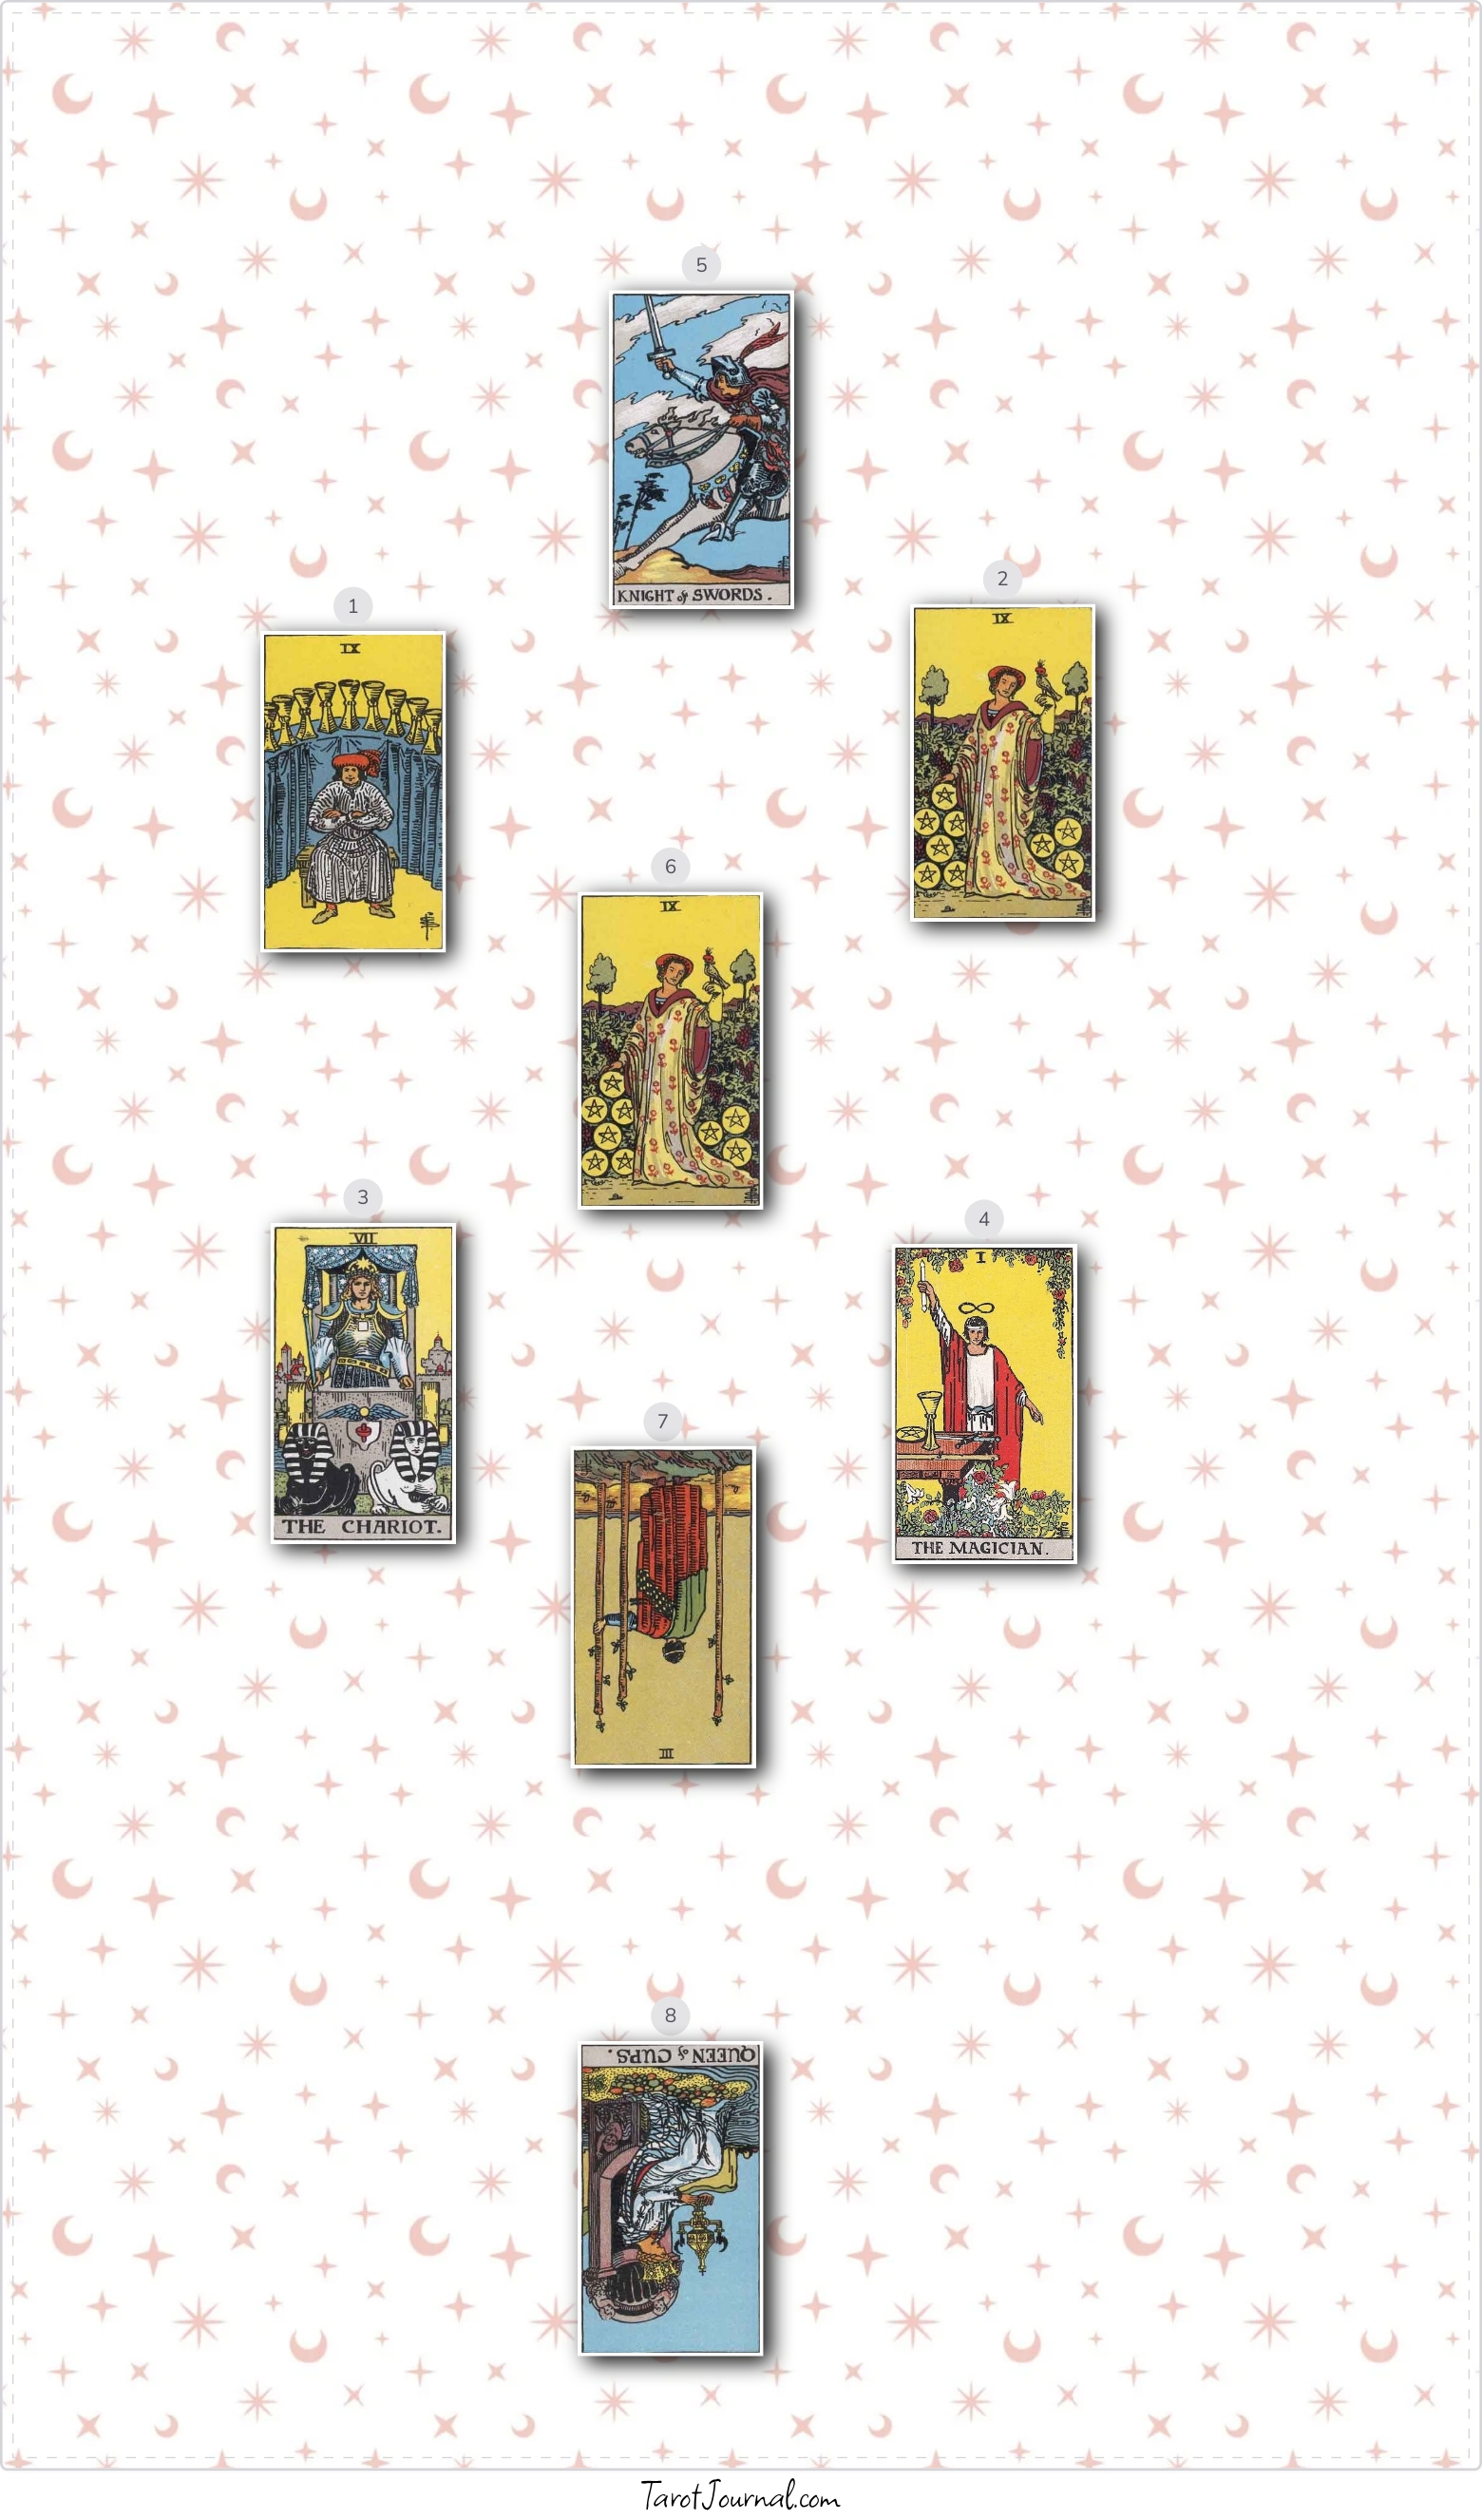 What can I do to fix my relationship? - tarot reading by Peter